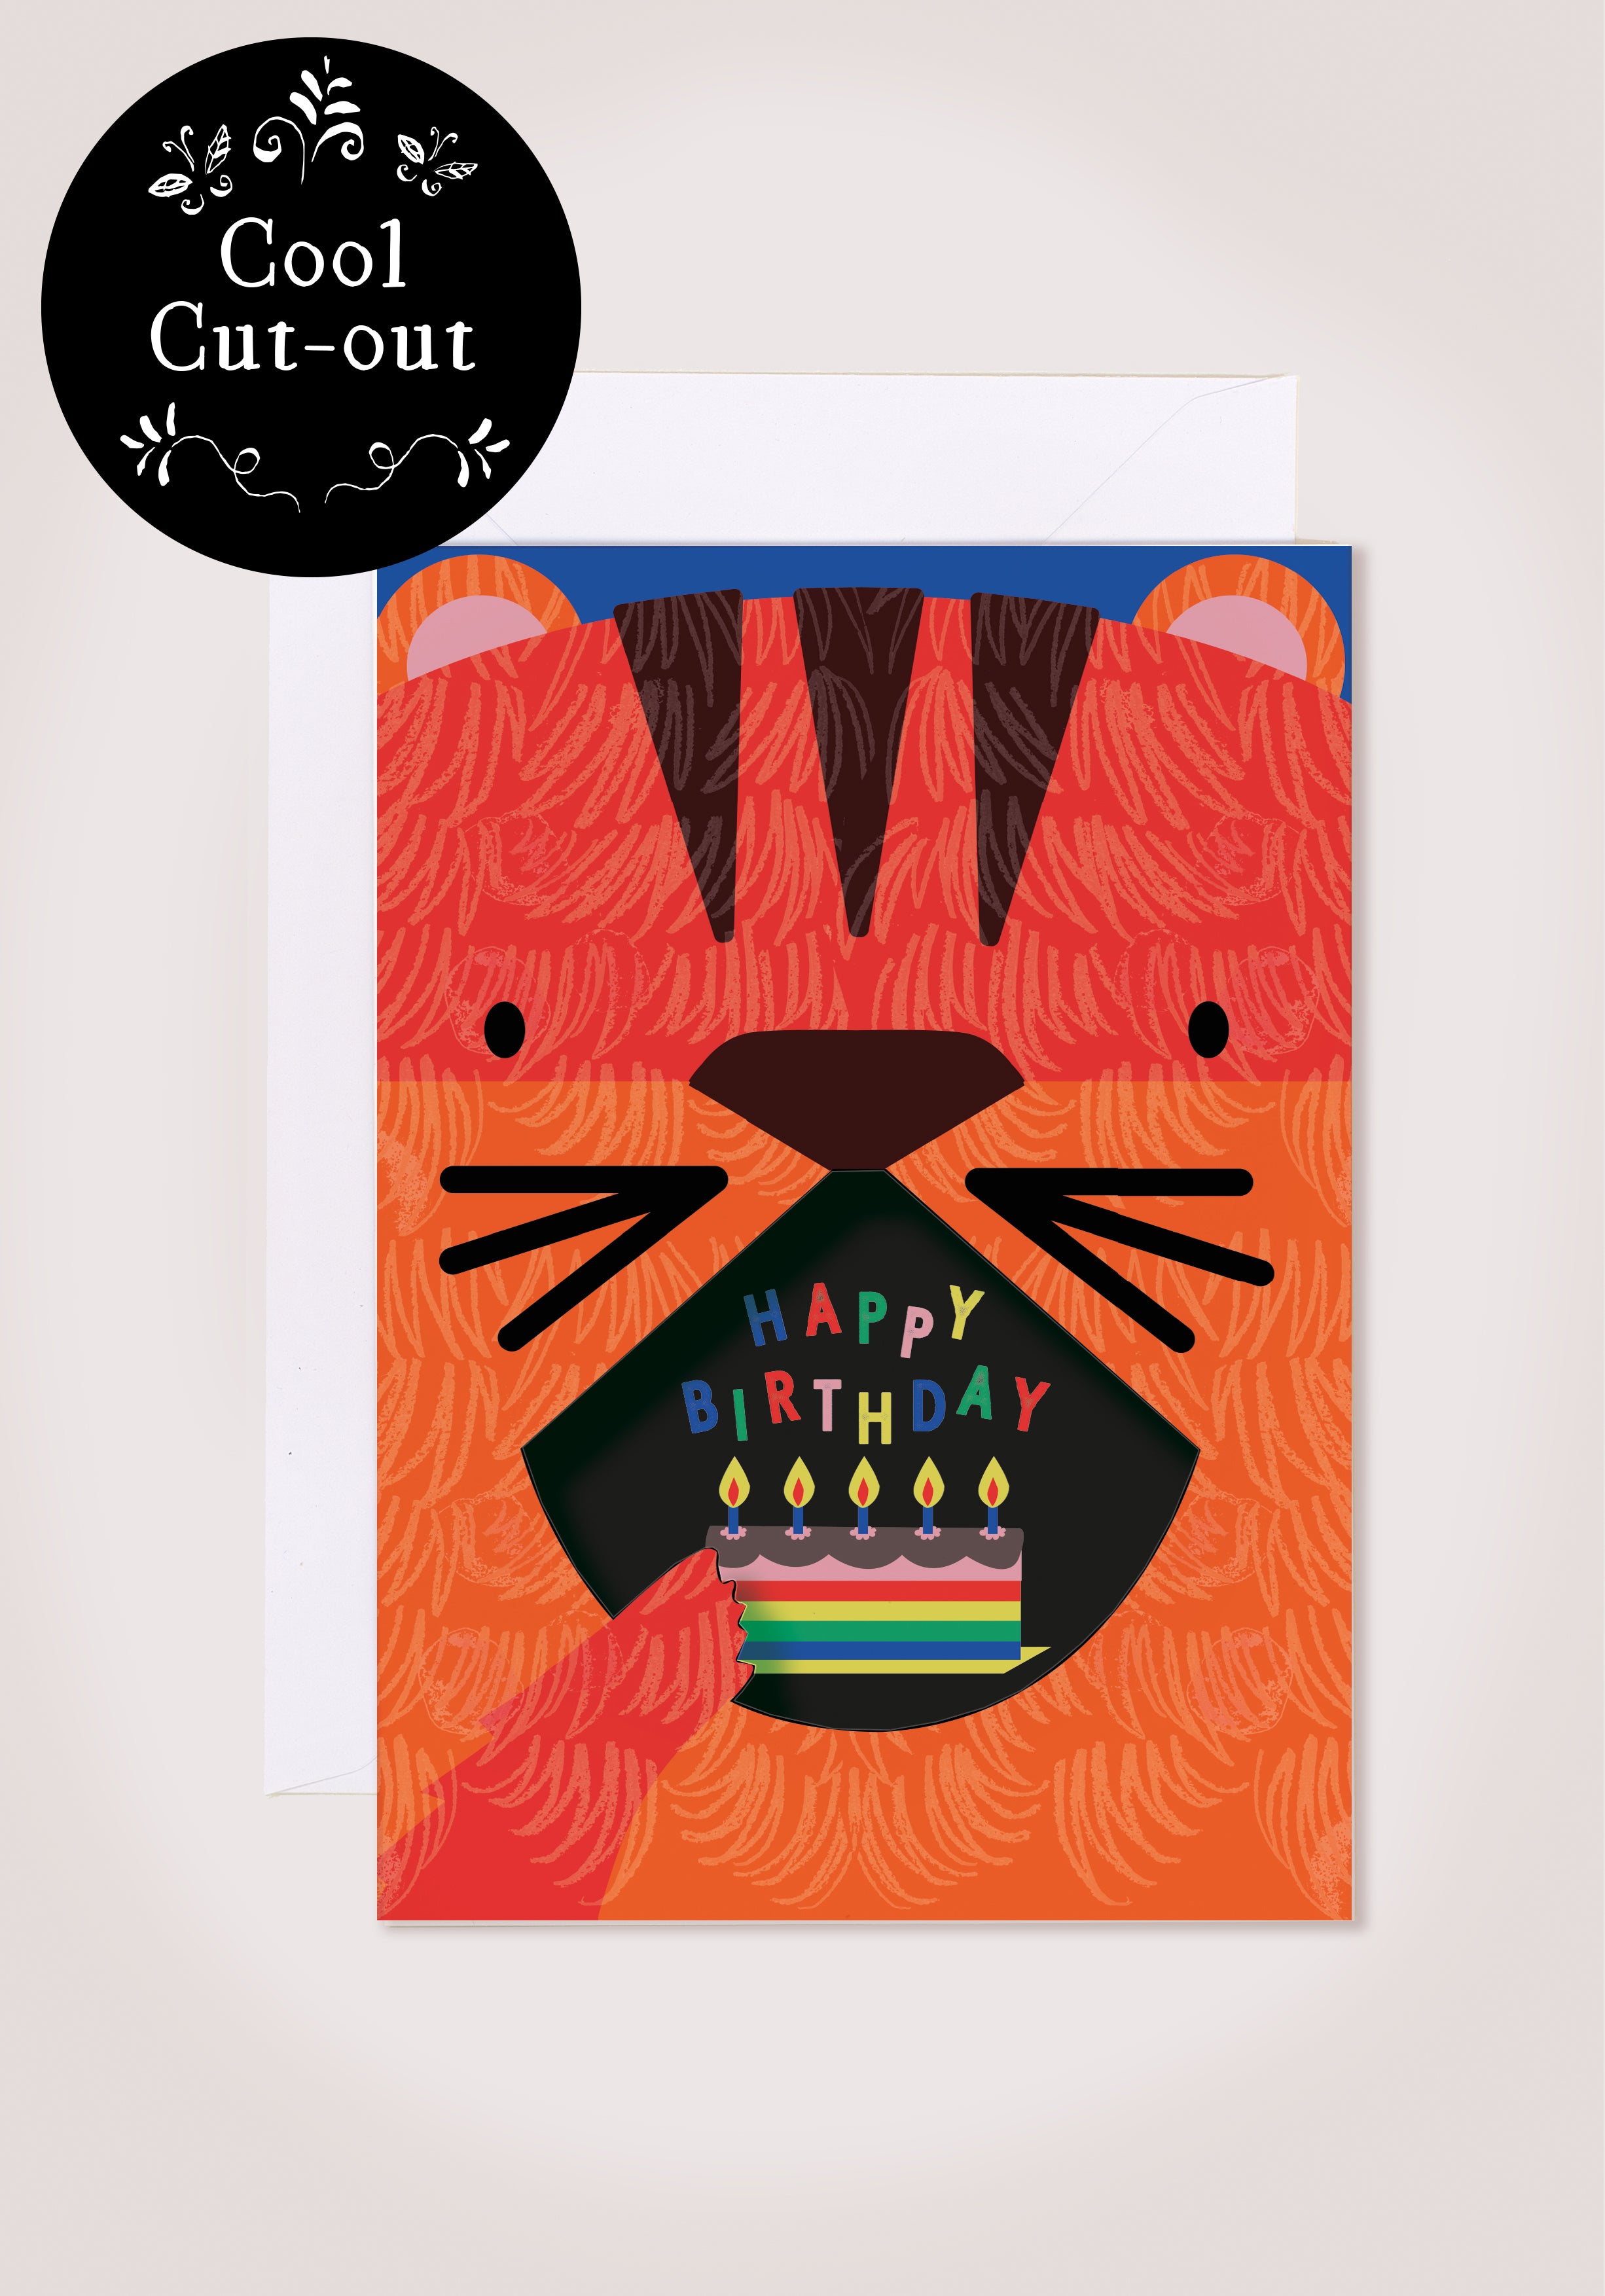 tiger Eating Cake Birthday Card with cut-out mouth